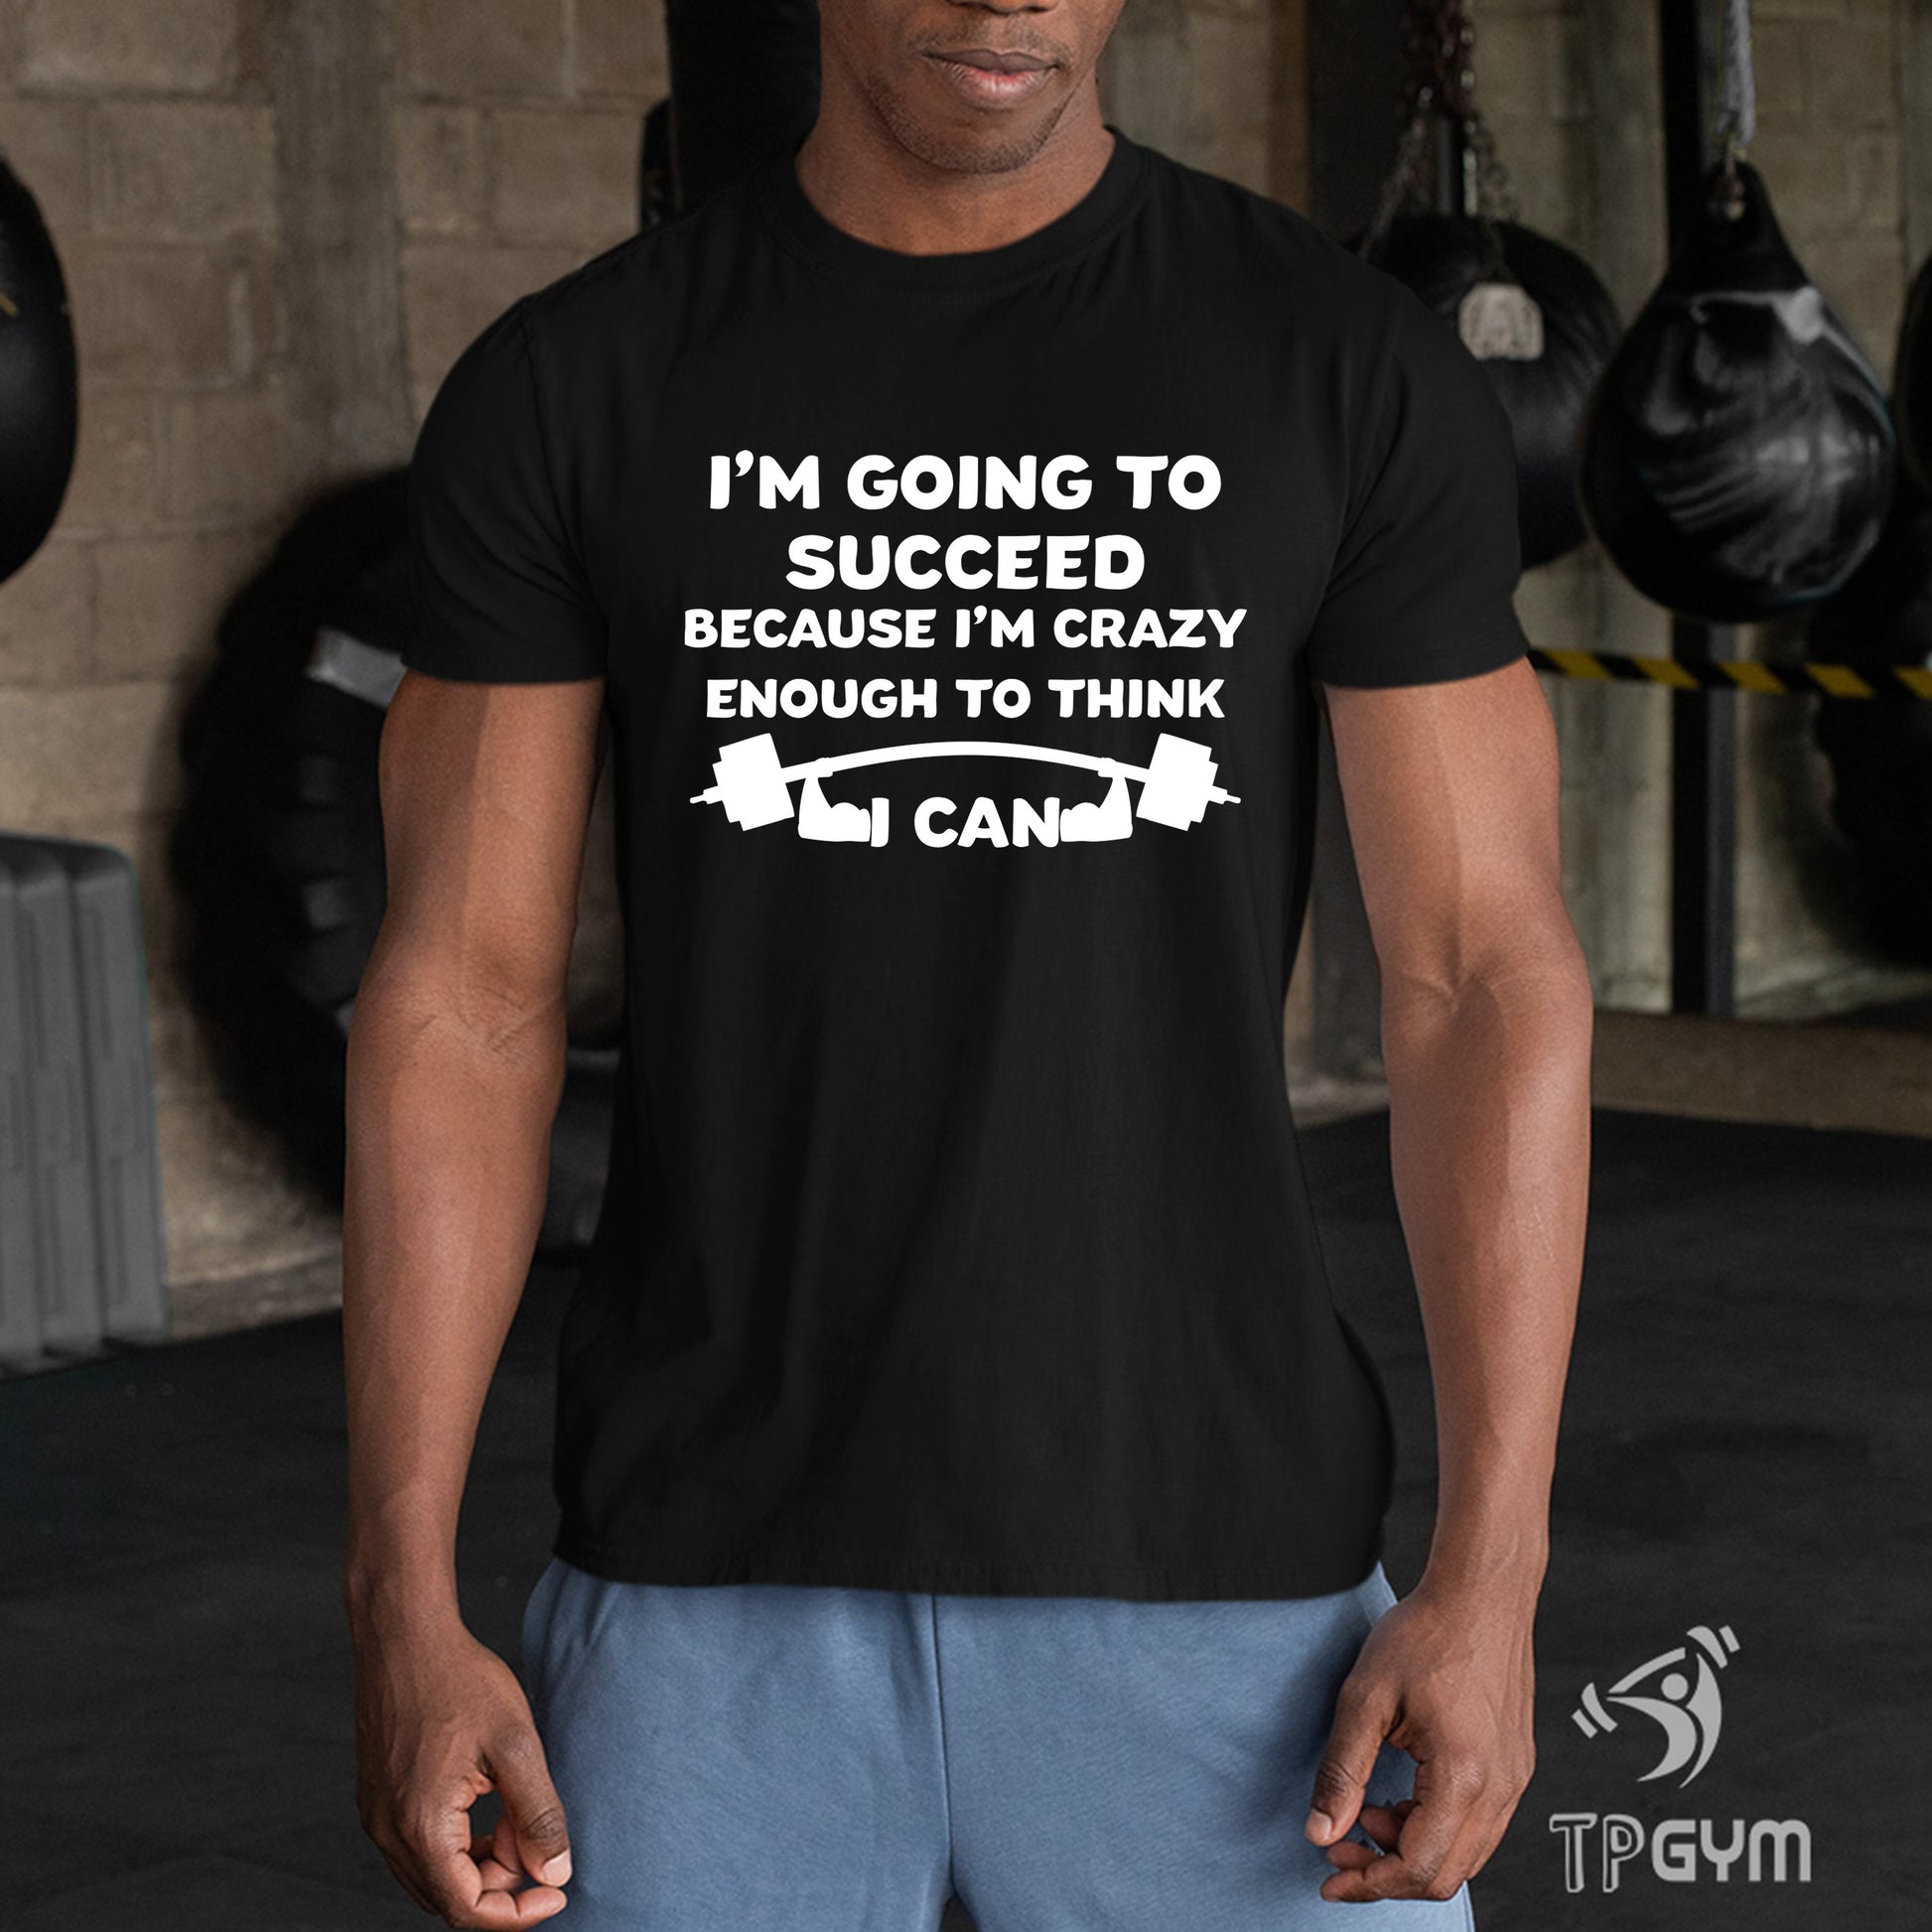 Gym Fitness Crossfit T shirt I am Going To Succeed Dumbbells